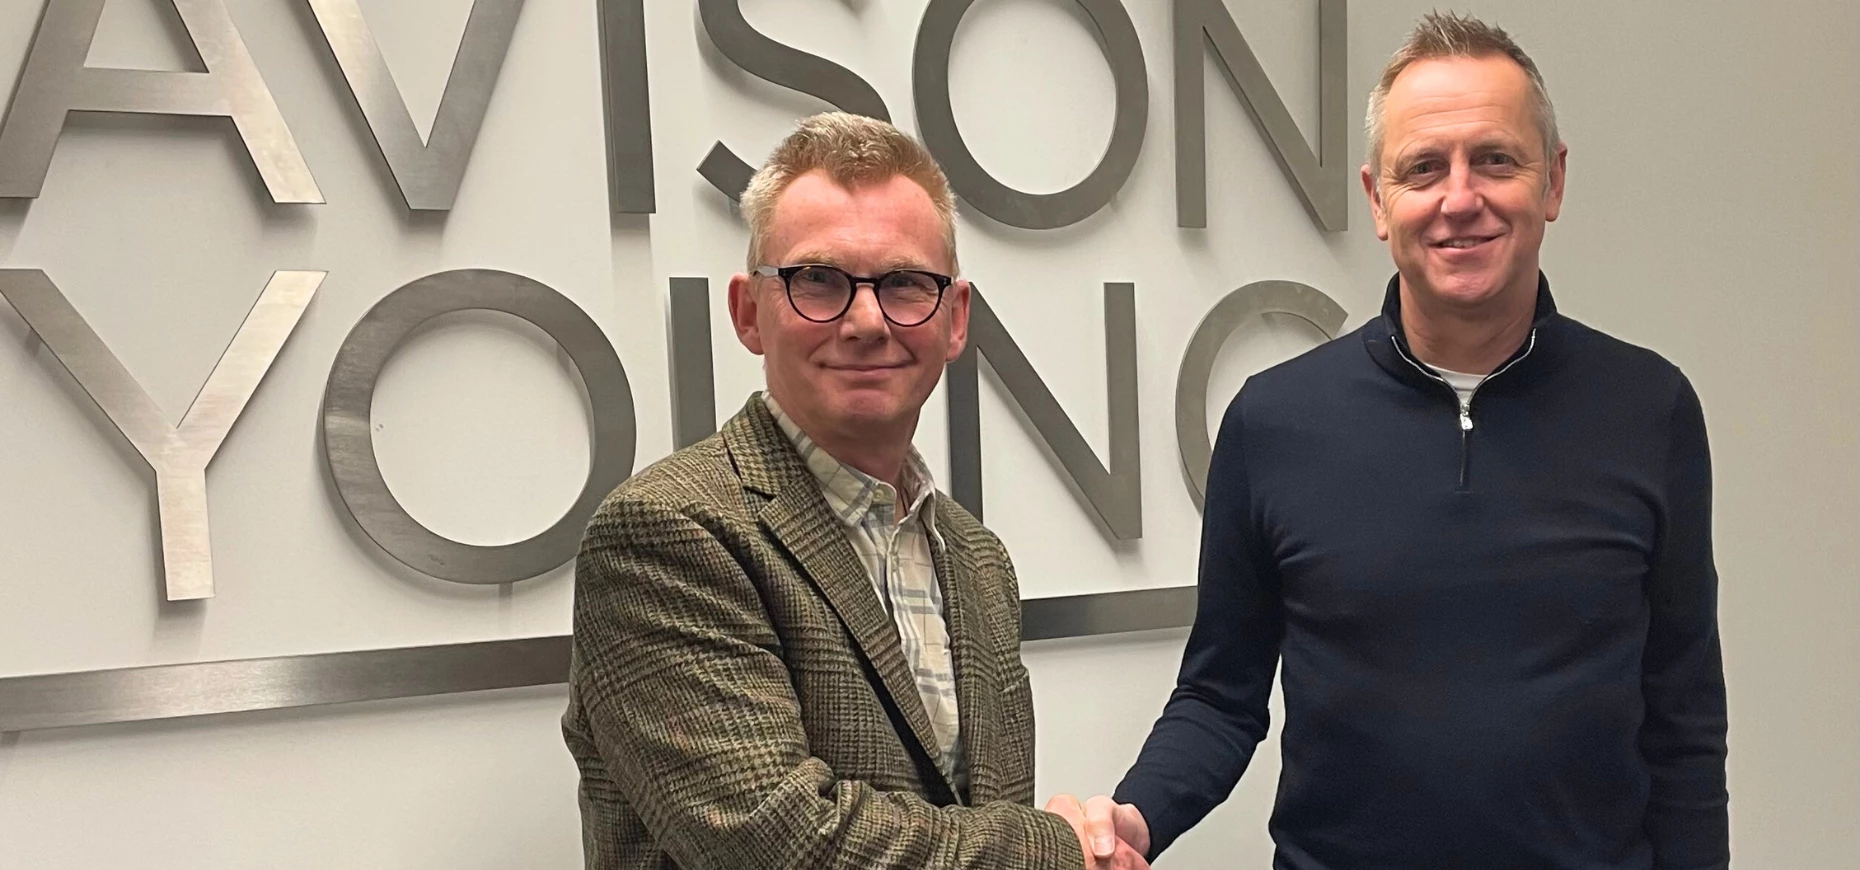 Gordon Hewling welcomes Mark McKelvey to Avison Young's Newcastle office.